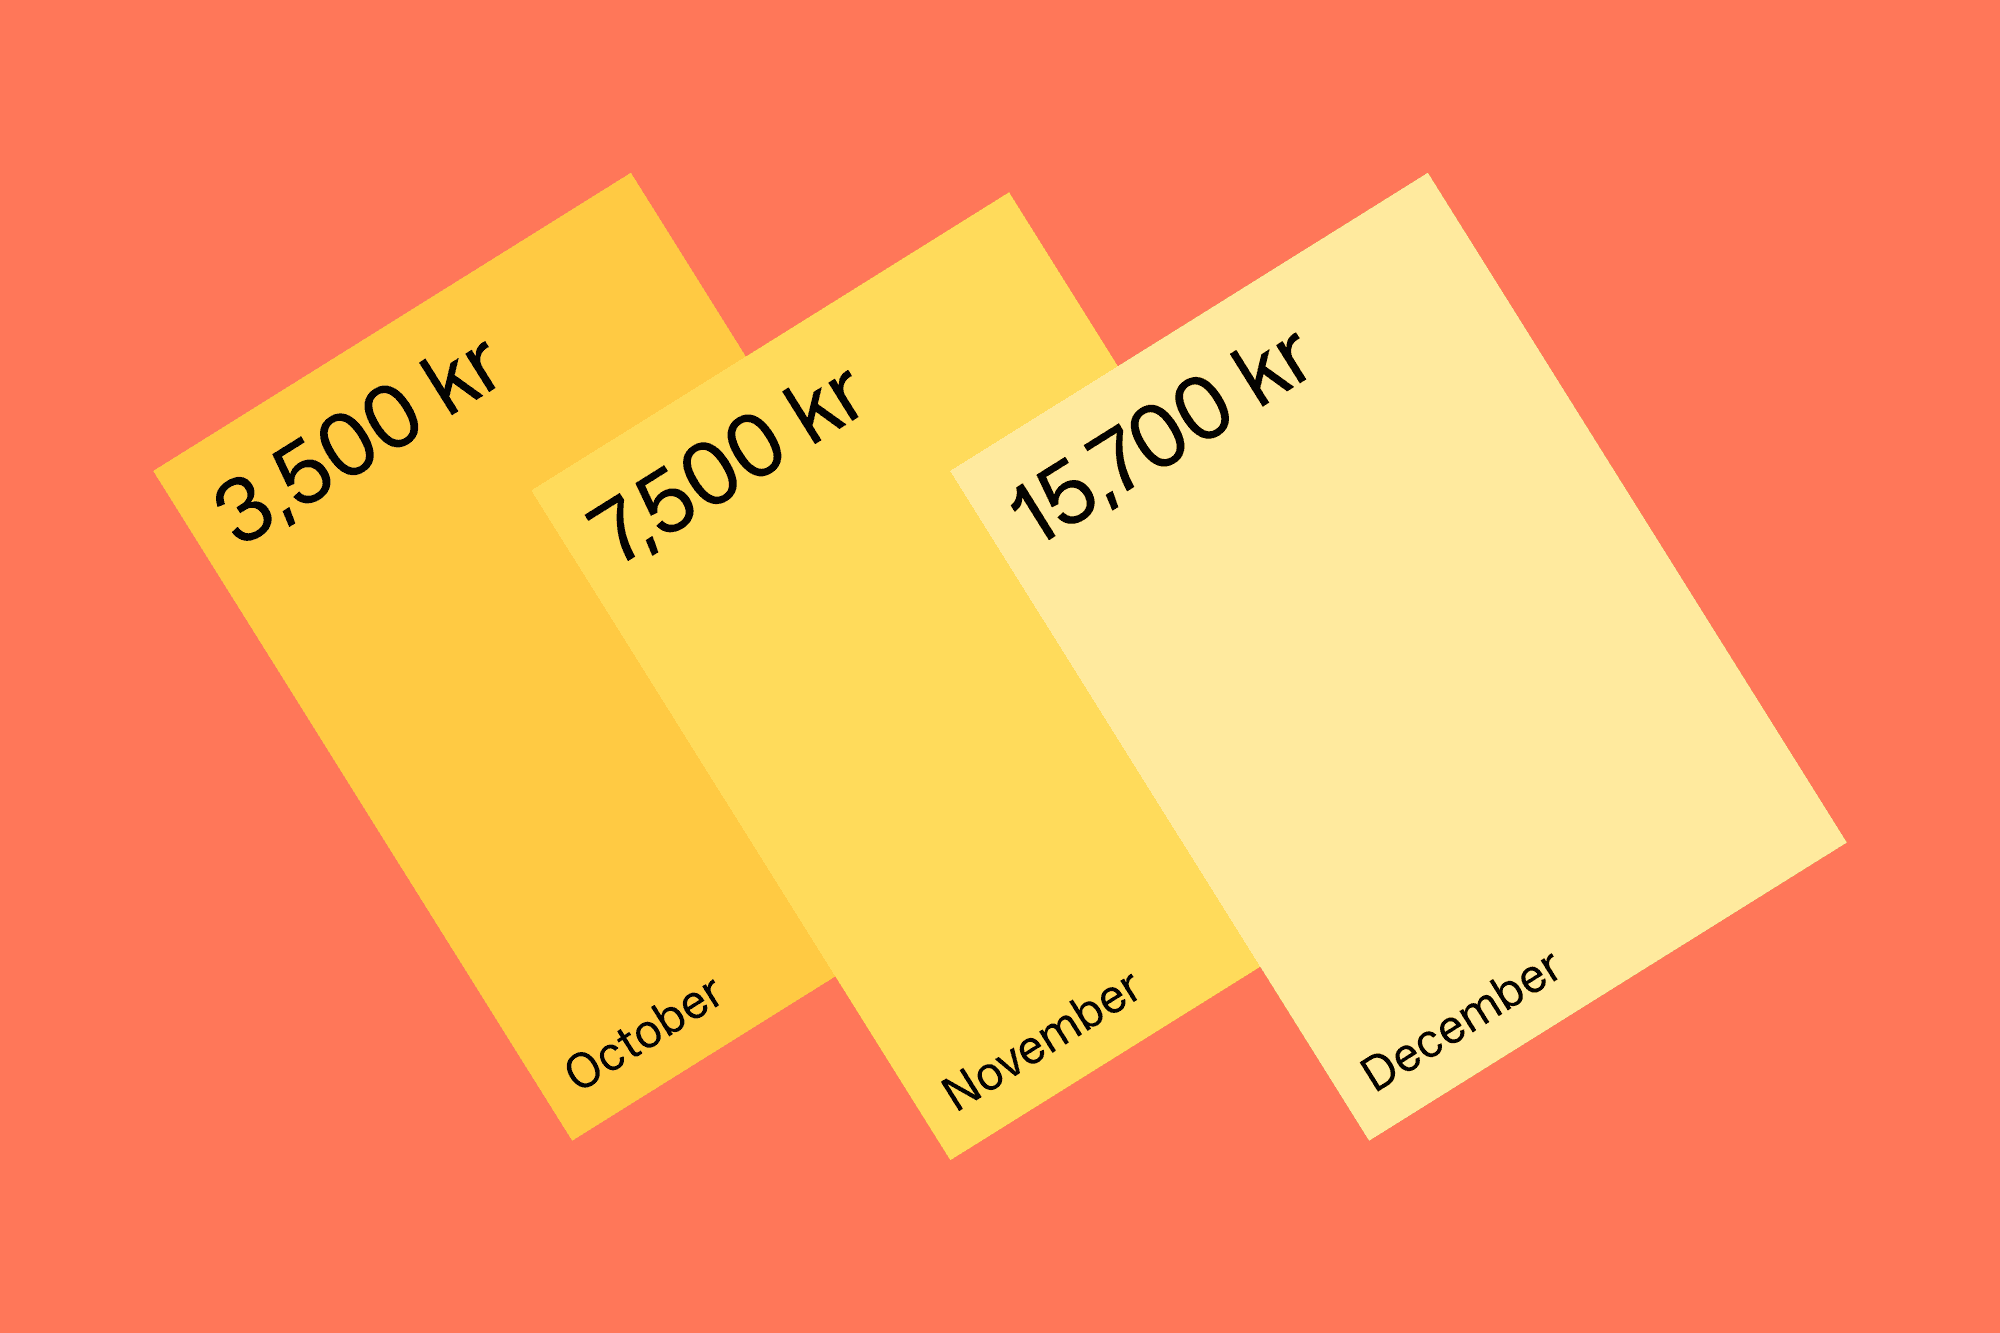 Three yellow electricity bills illustrated on a red background.